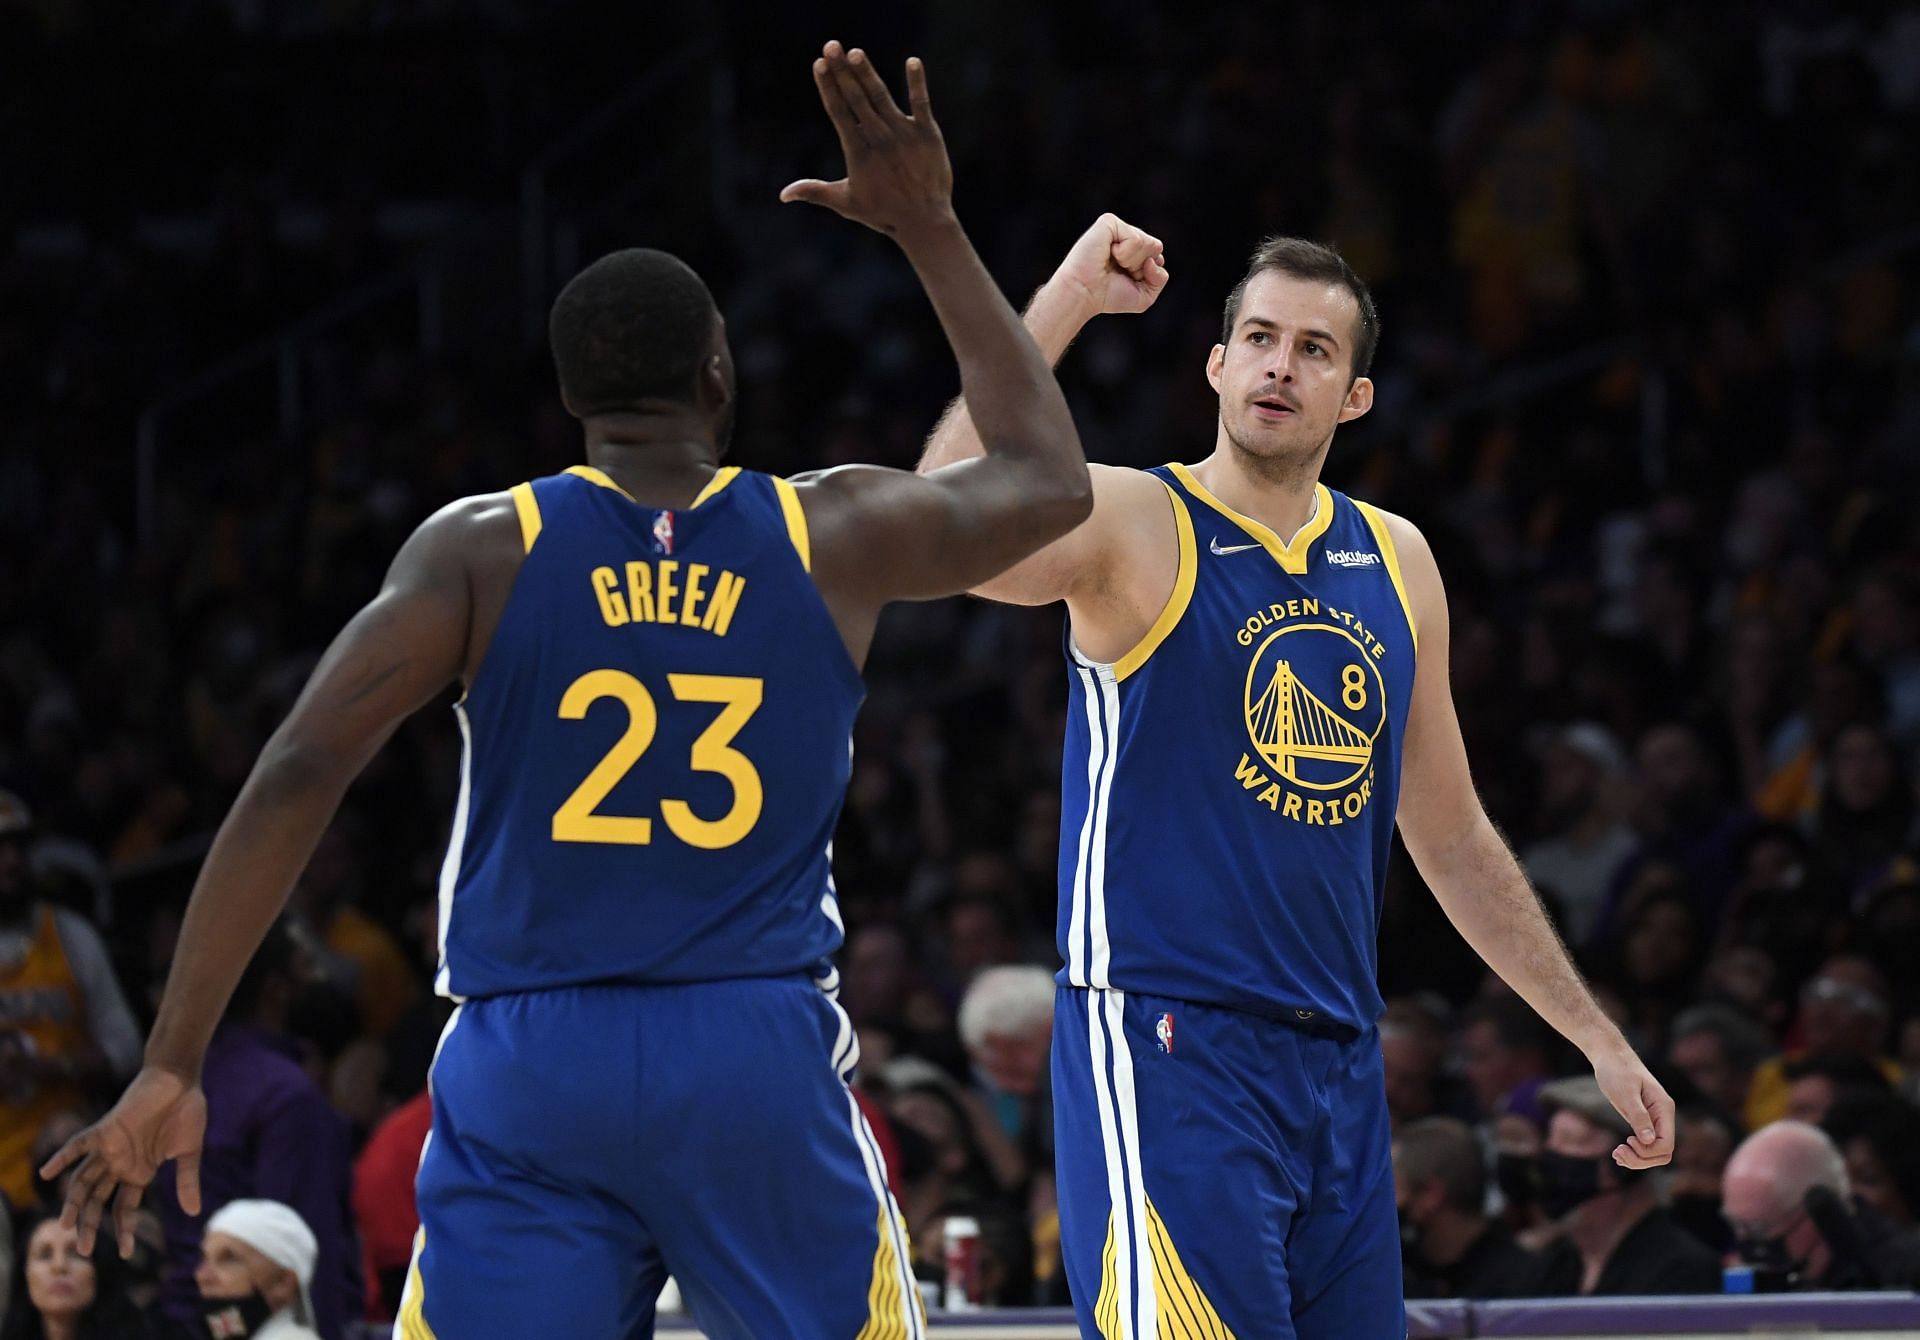 Draymond Green and Nemanja Bjelica (right) of the Golden State Warriors during their match against the LA Lakers.